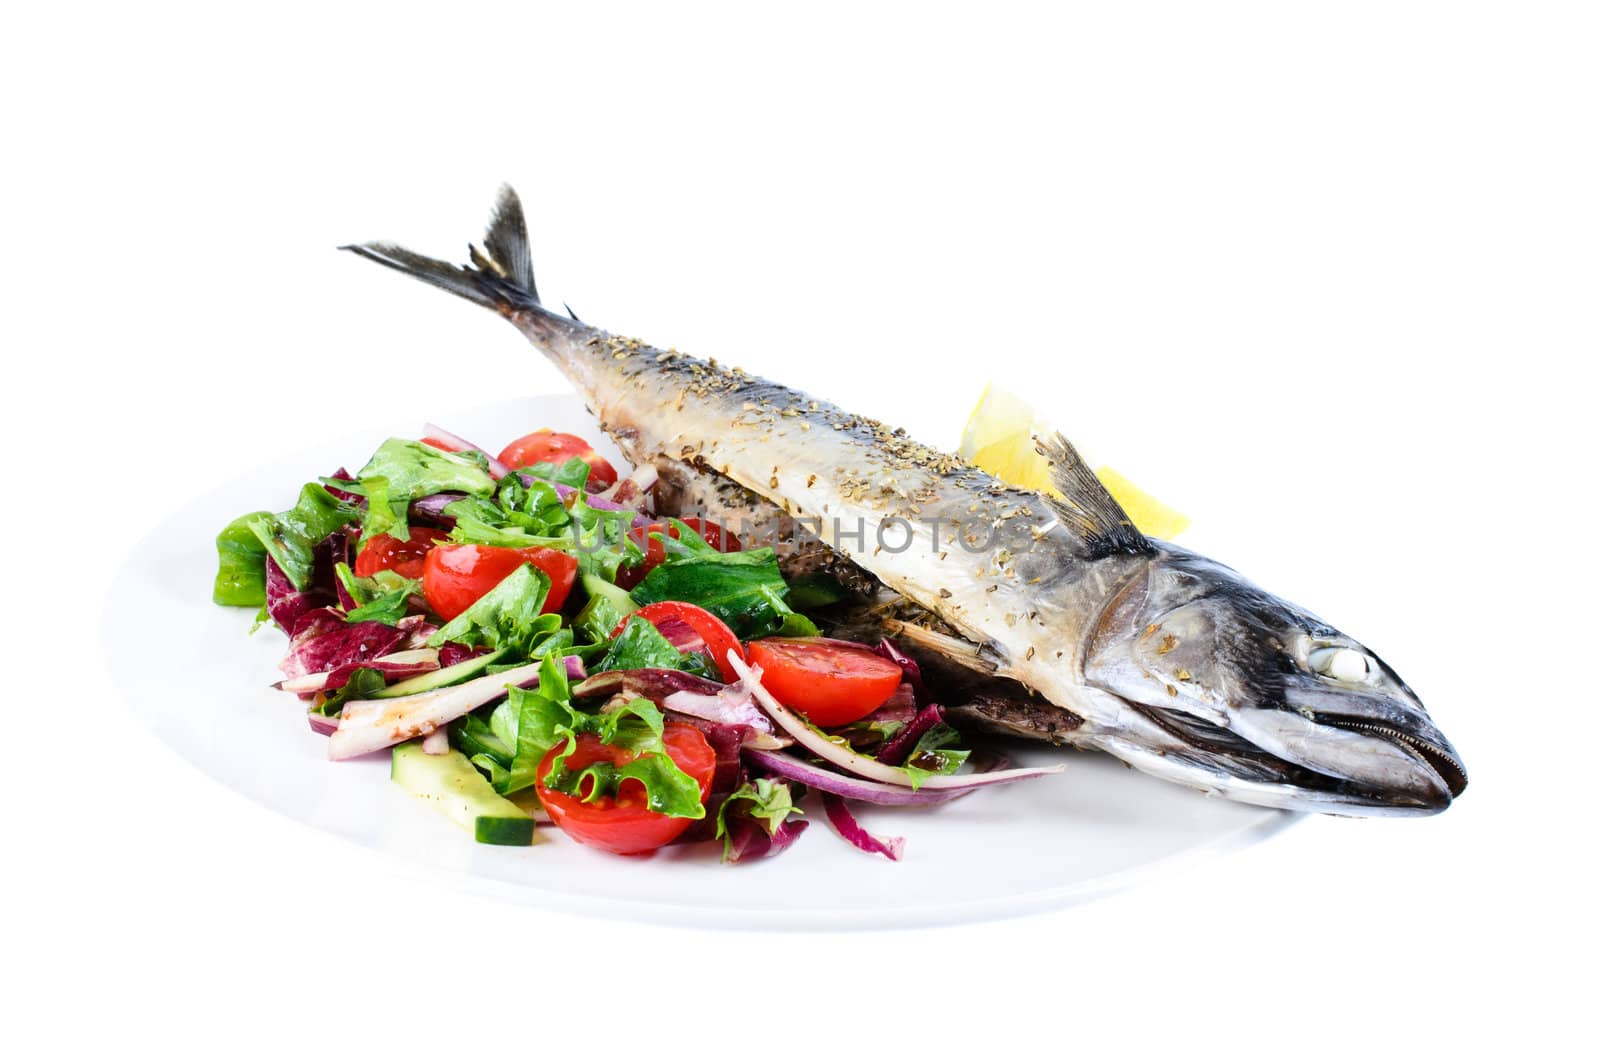 Grilled mackerel fish with vegetable salad isolated